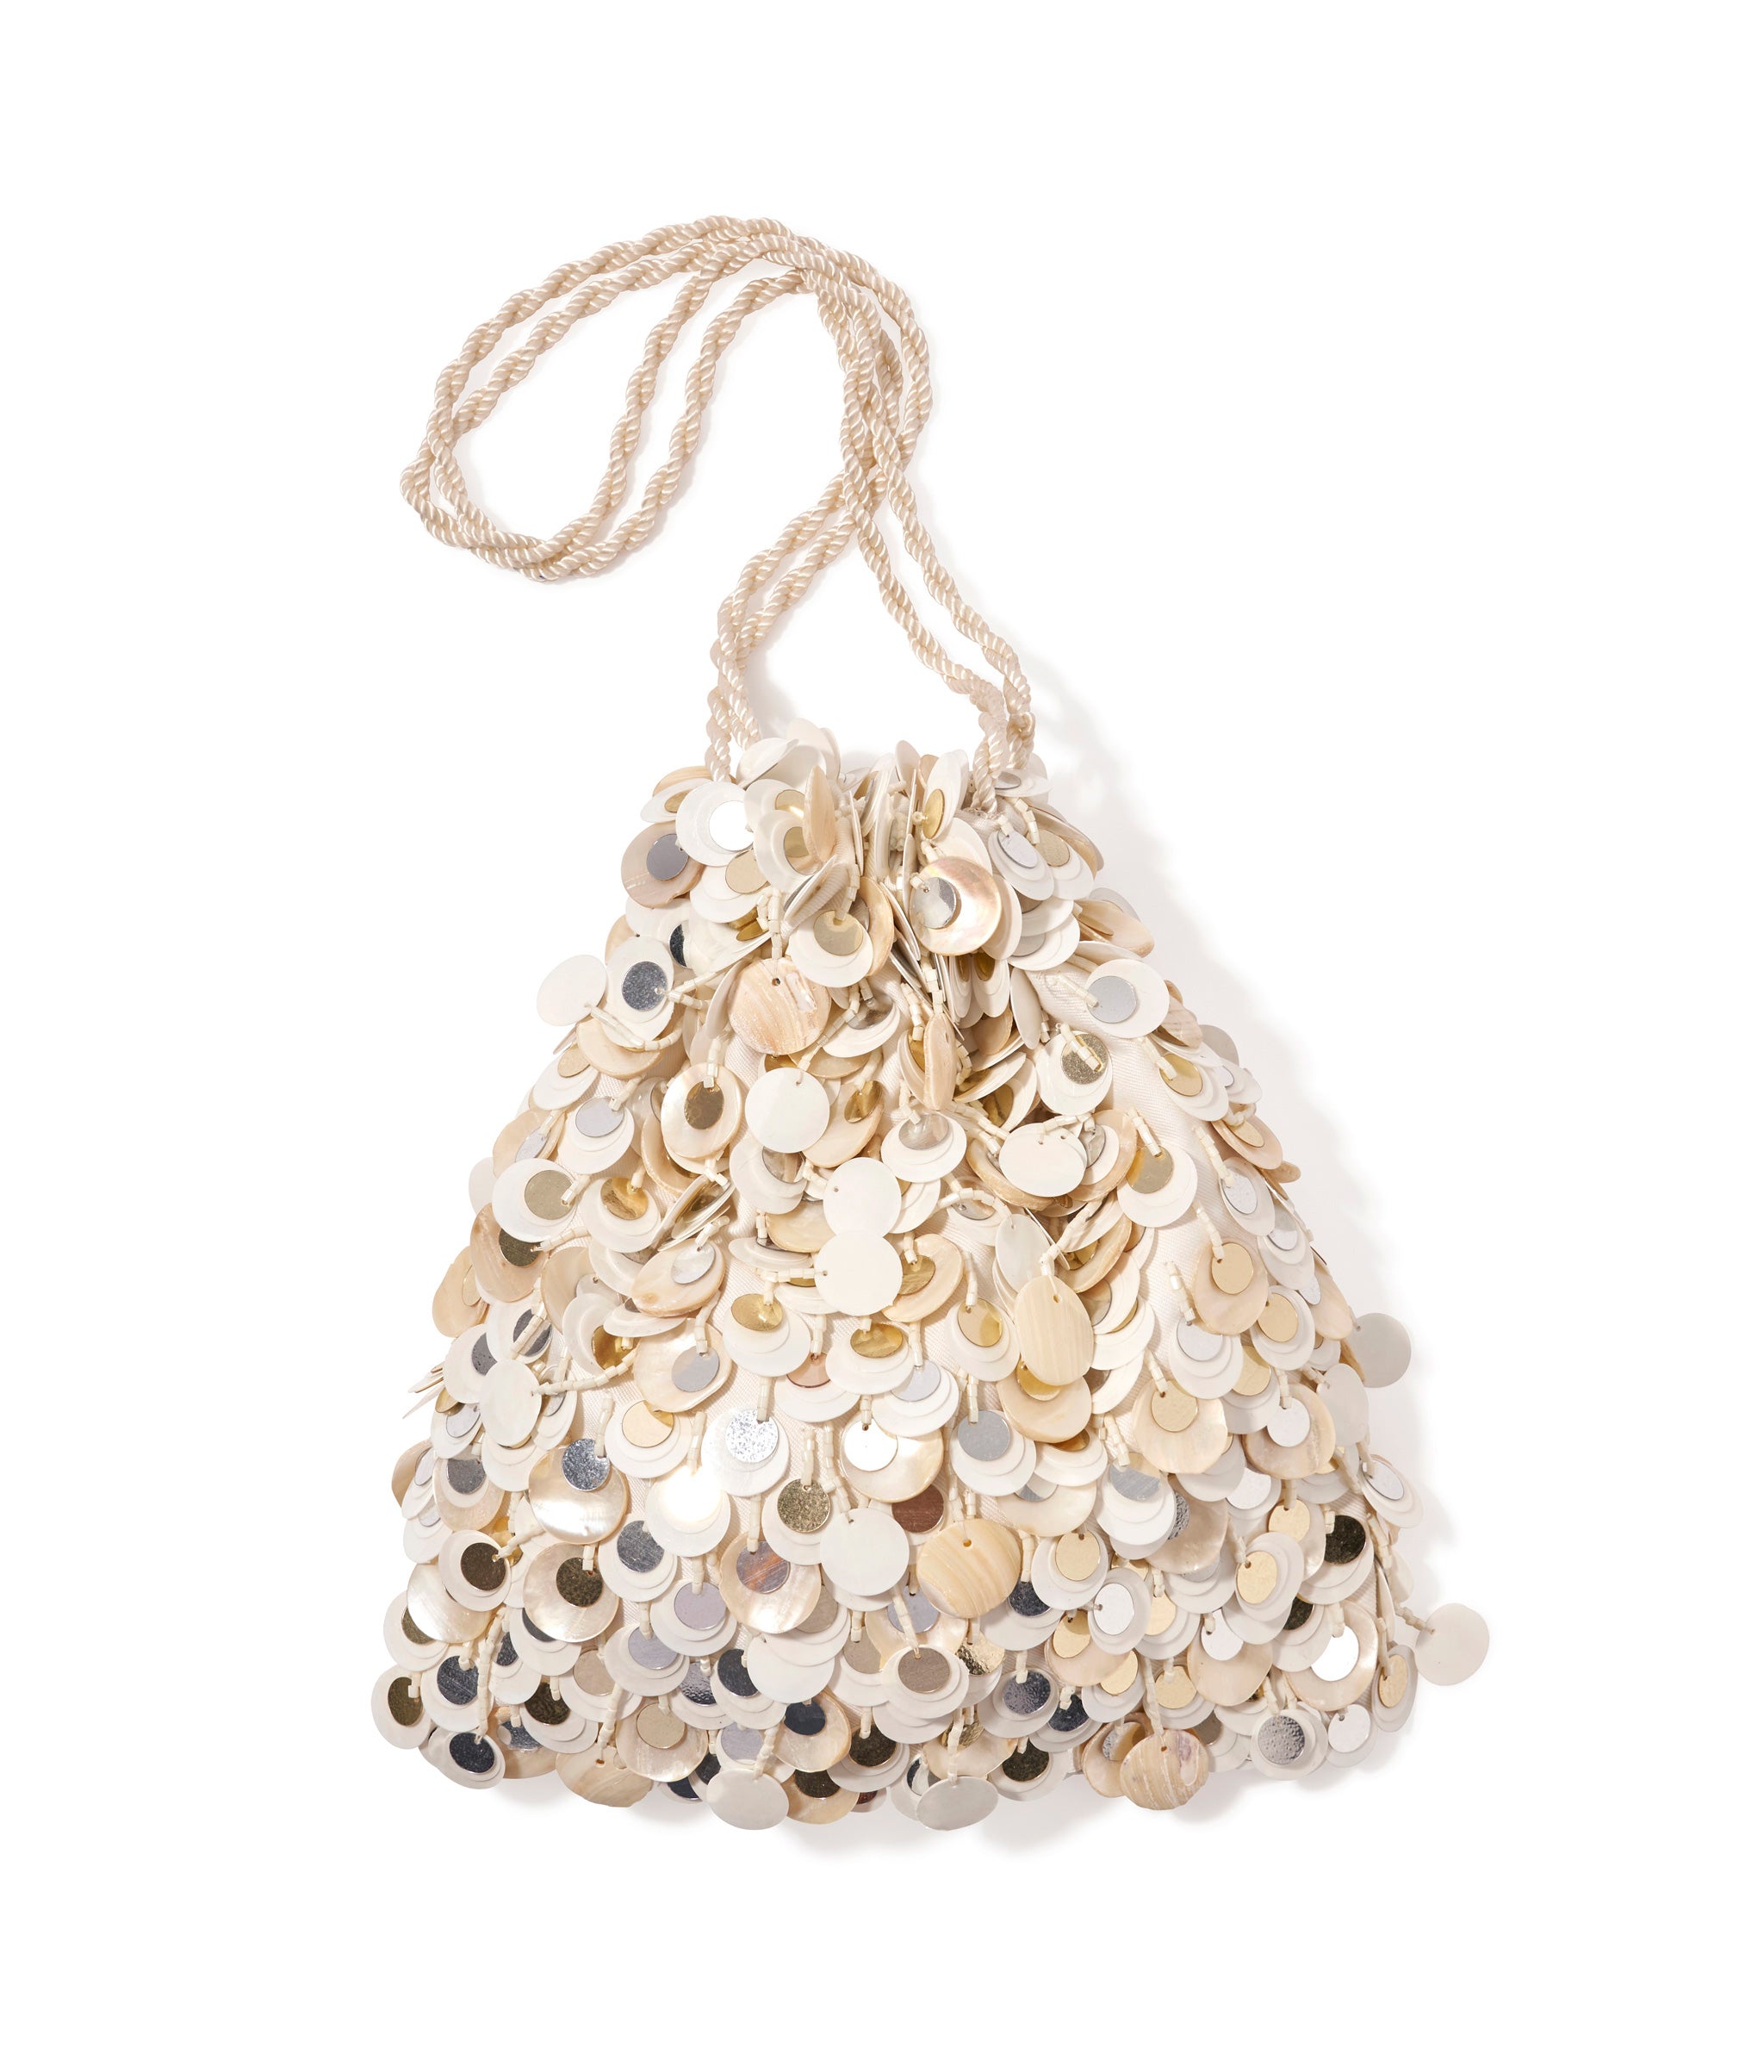 Gala Bag in Pearl Oyster